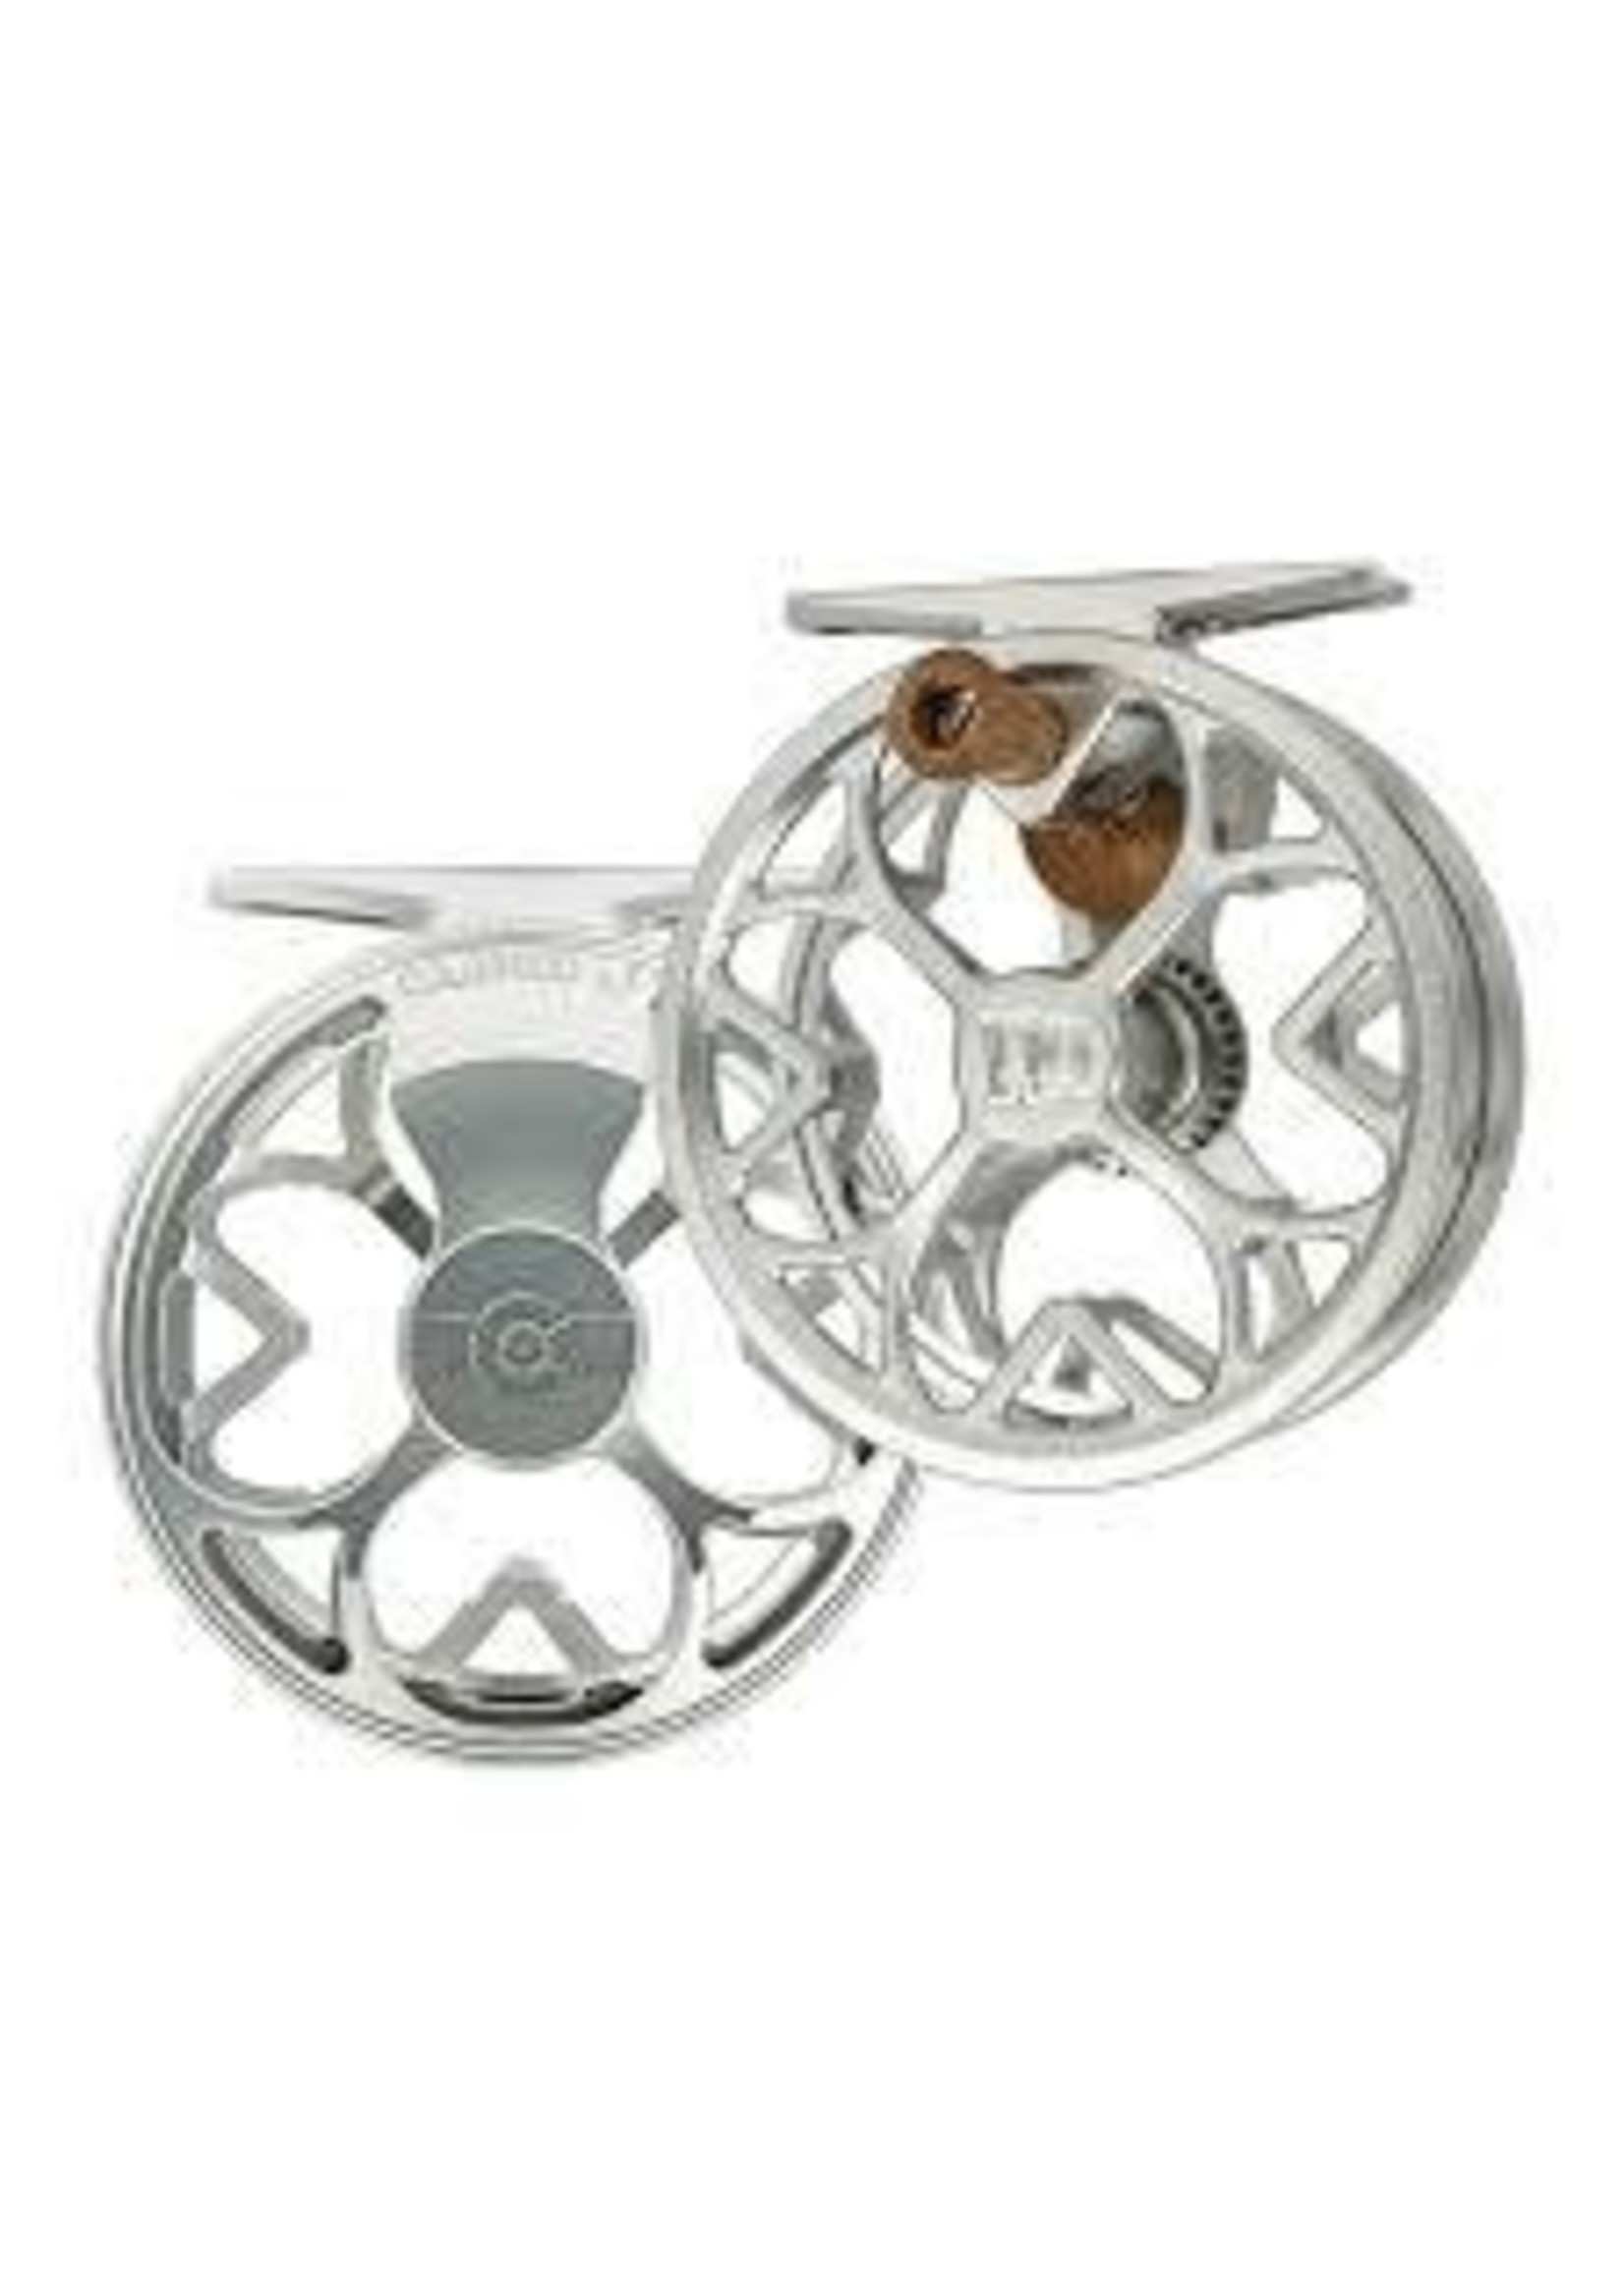 Ross Colorado Fly Reel - Platinum 2-3 WT Made in USA, Reels -  Canada